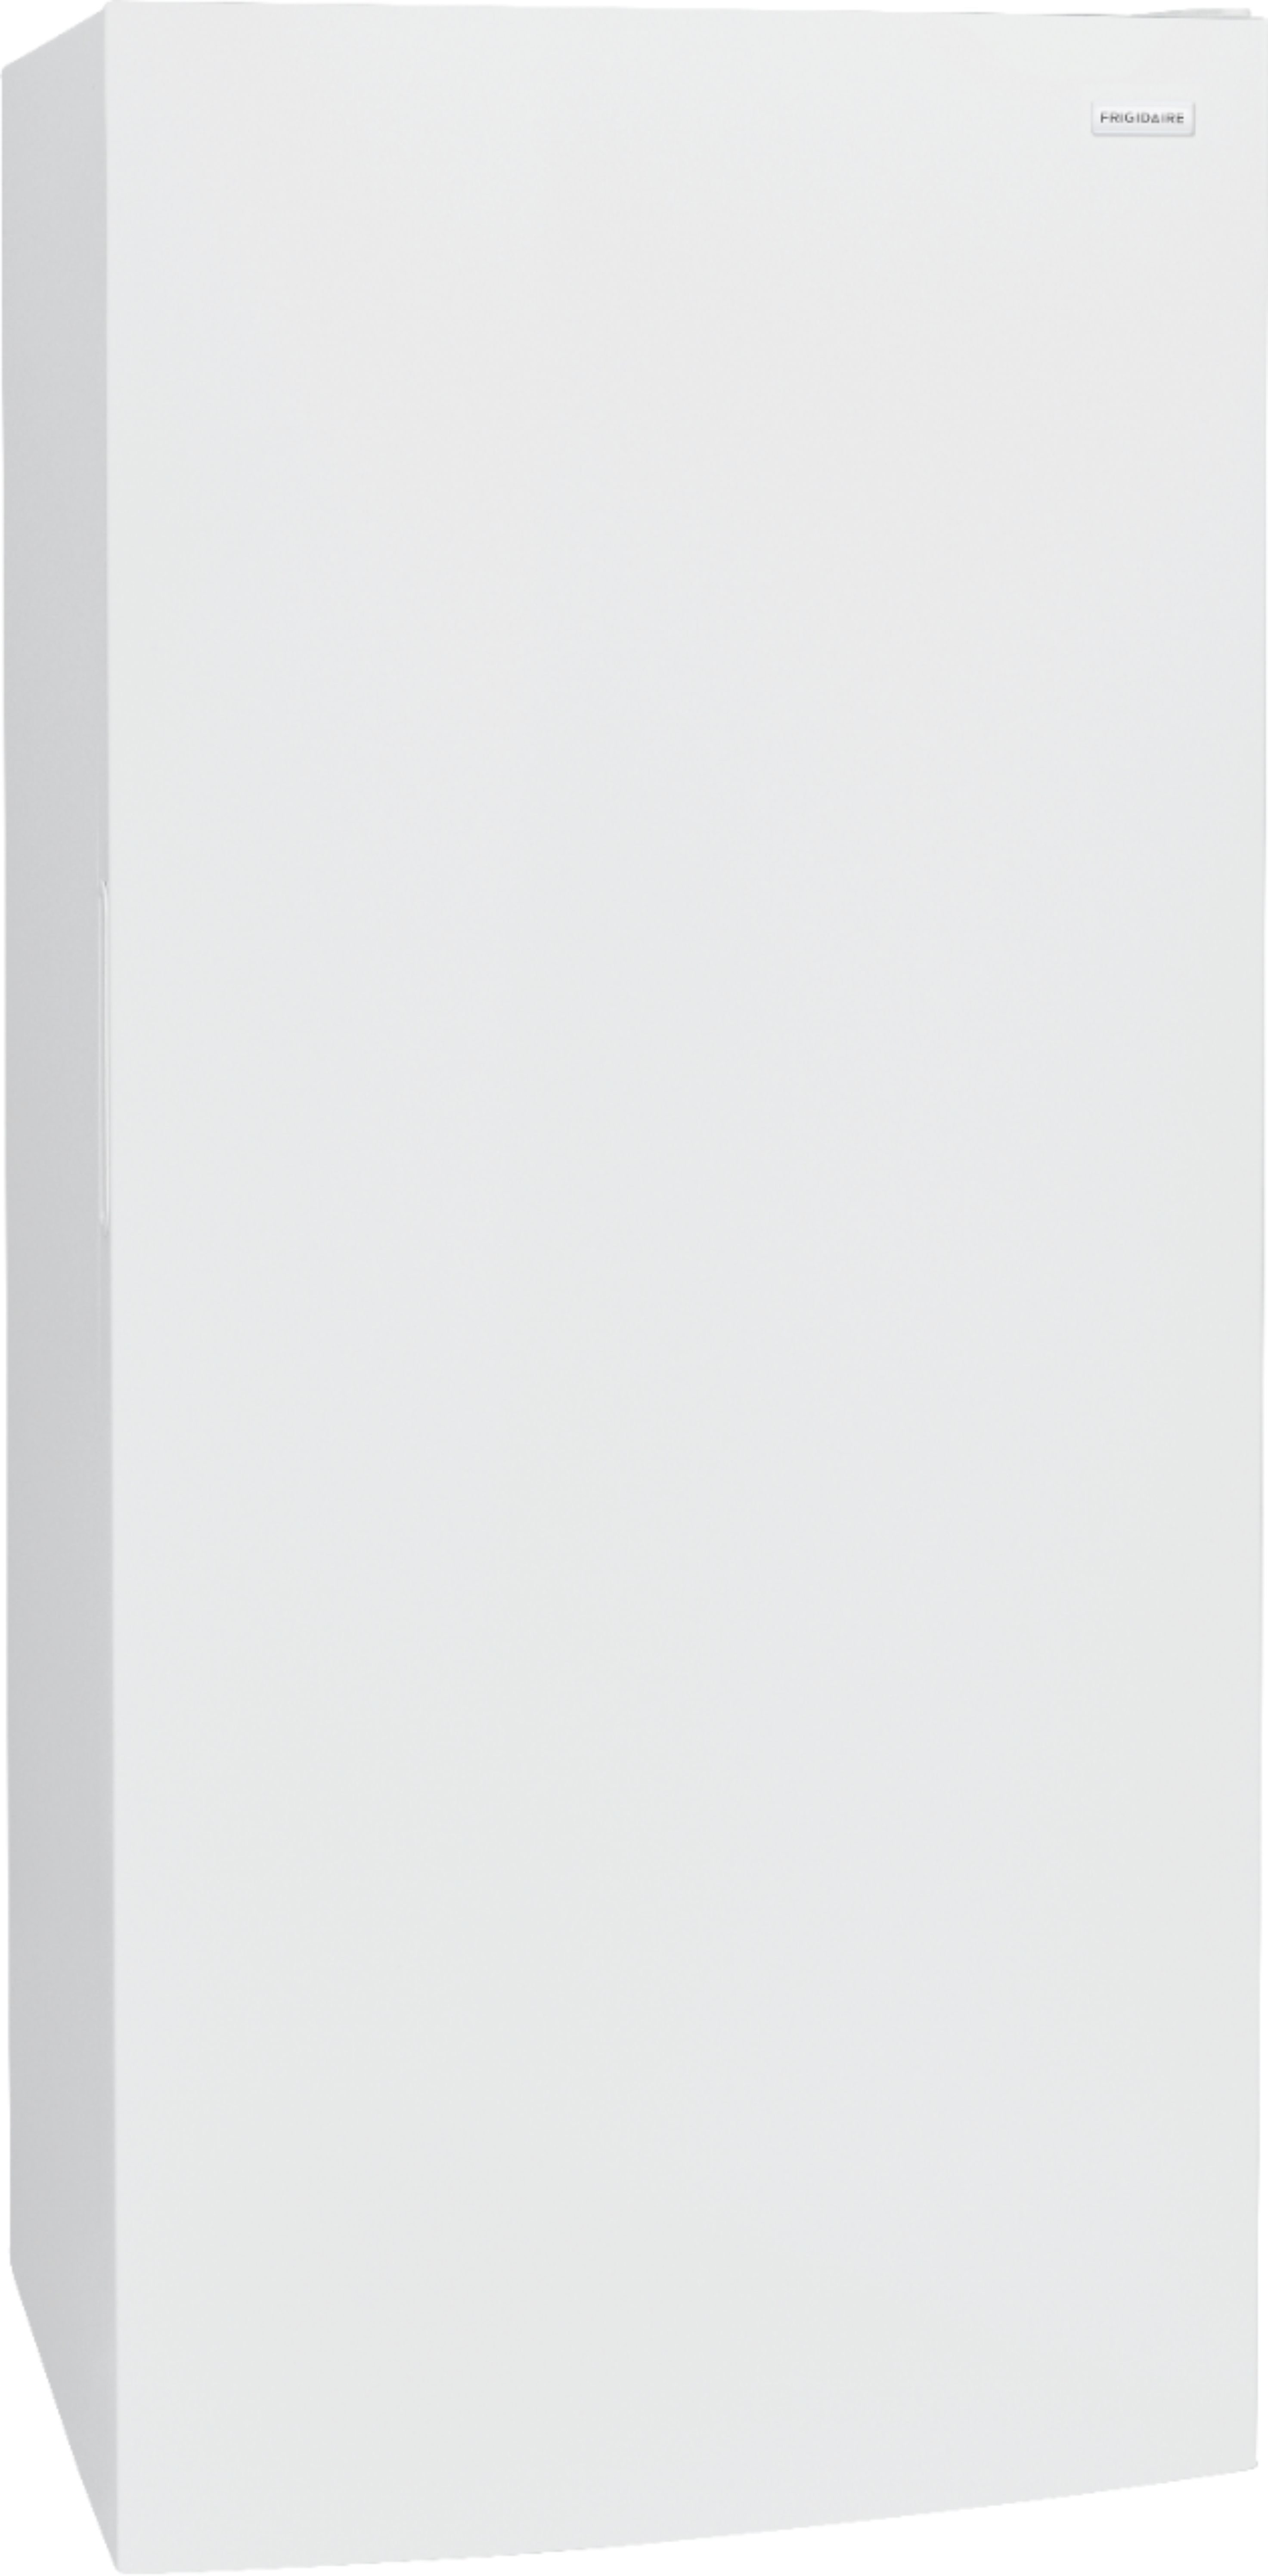 Angle View: Fisher & Paykel - ActiveSmart 7.8 Cu. Ft. Frost-Free Upright Freezer - White